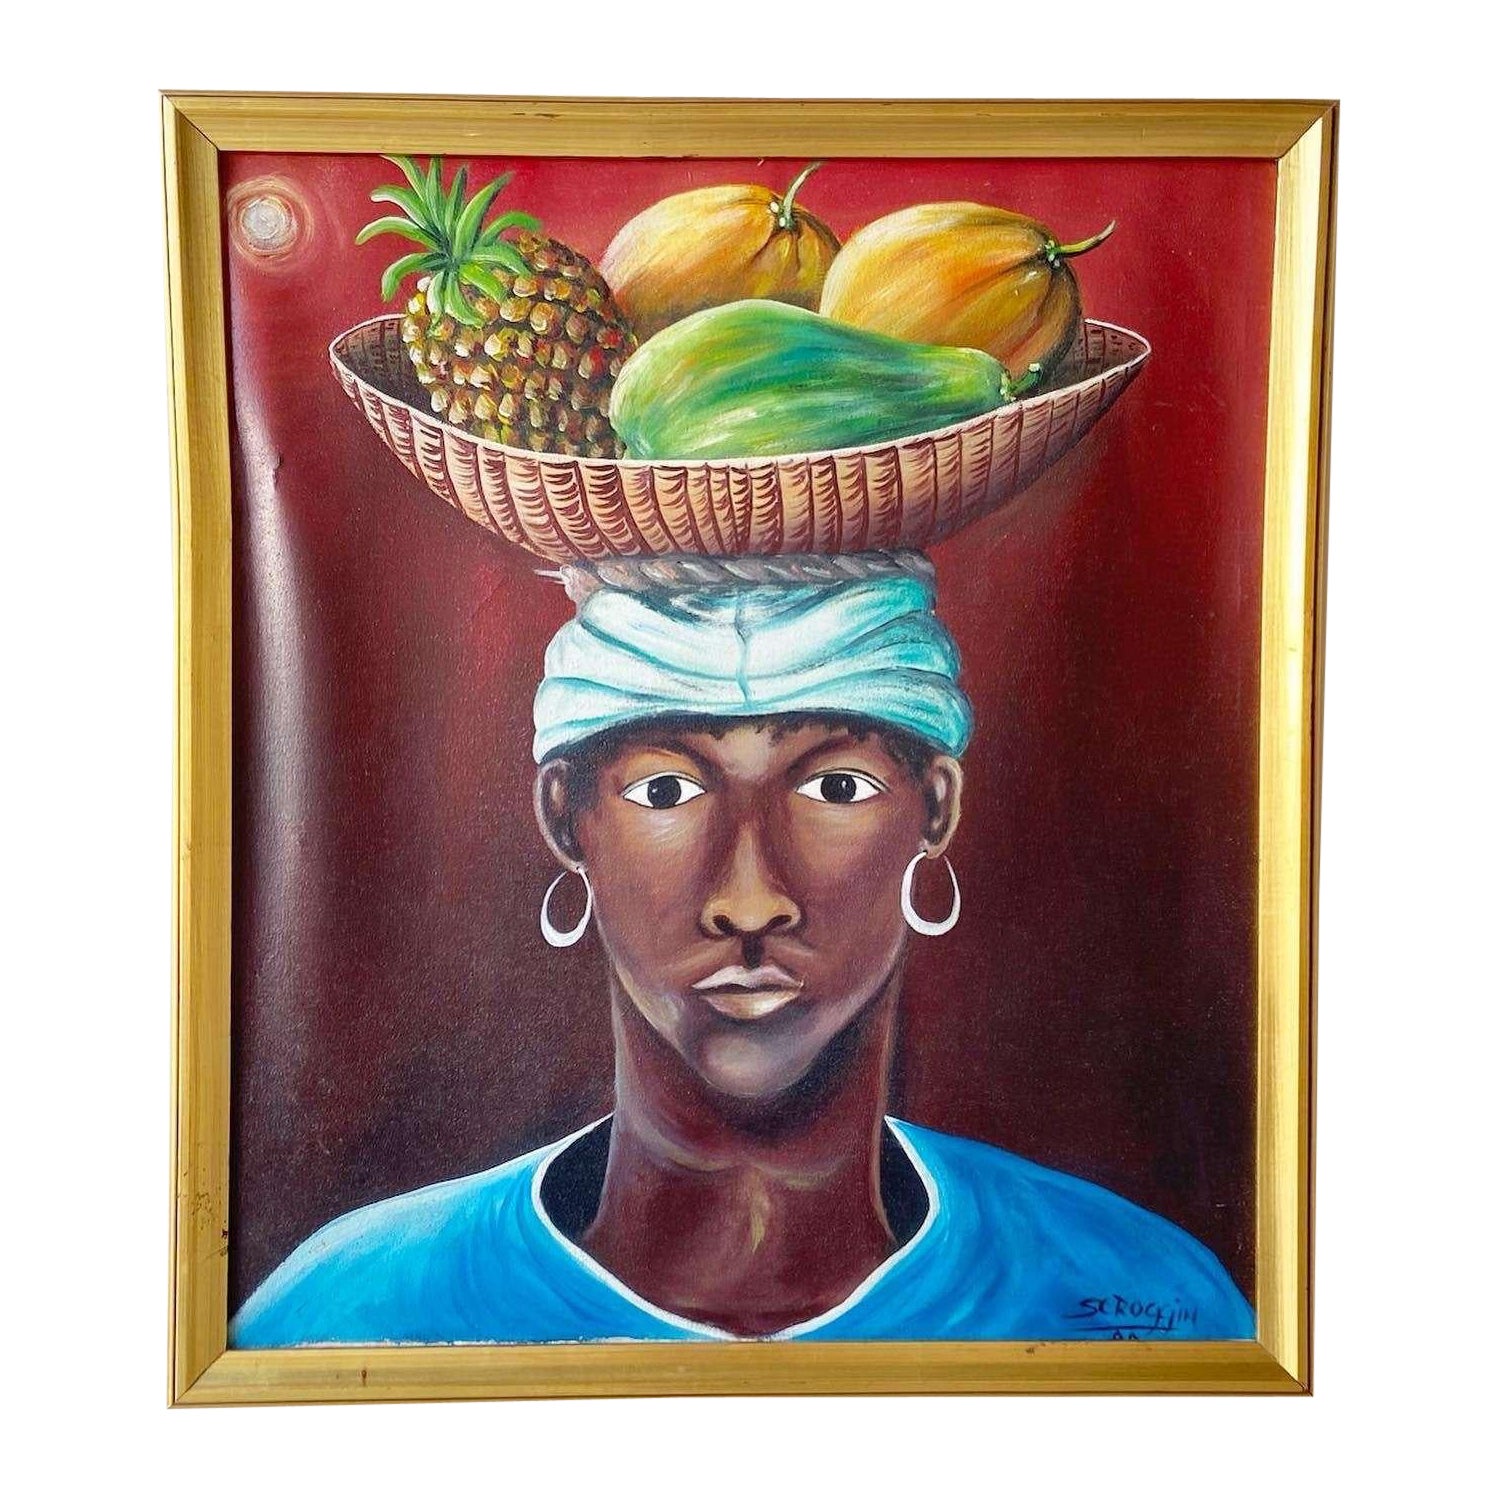 Original Framed Oil Painting of Caribbean Woman With Fruit Bowl by Scroggin